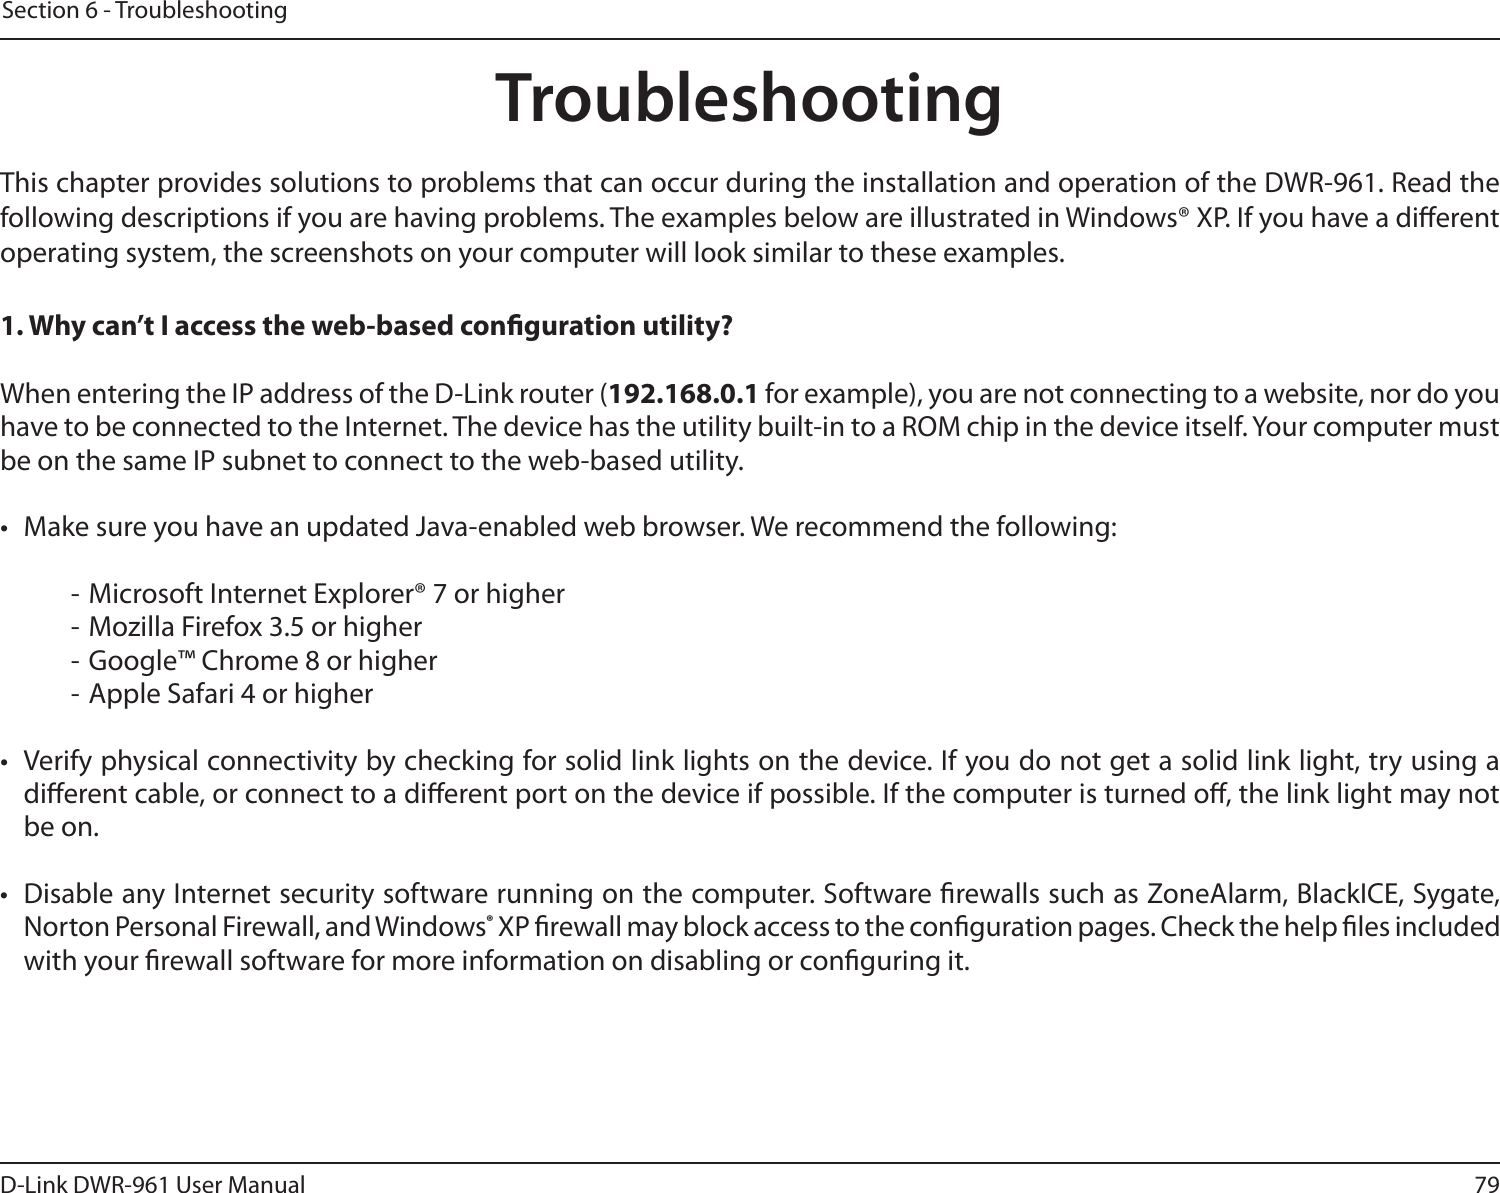 79D-Link DWR-961 User ManualSection 6 - TroubleshootingTroubleshootingThis chapter provides solutions to problems that can occur during the installation and operation of the DWR-961. Read the following descriptions if you are having problems. The examples below are illustrated in Windows® XP. If you have a dierent operating system, the screenshots on your computer will look similar to these examples.1. Why can’t I access the web-based conguration utility?When entering the IP address of the D-Link router (192.168.0.1 for example), you are not connecting to a website, nor do you have to be connected to the Internet. The device has the utility built-in to a ROM chip in the device itself. Your computer must be on the same IP subnet to connect to the web-based utility. •  Make sure you have an updated Java-enabled web browser. We recommend the following:  - Microsoft Internet Explorer® 7 or higher- Mozilla Firefox 3.5 or higher- Google™ Chrome 8 or higher- Apple Safari 4 or higher•  Verify physical connectivity by checking for solid link lights on the device. If you do not get a solid link light, try using a dierent cable, or connect to a dierent port on the device if possible. If the computer is turned o, the link light may not be on.•  Disable any Internet security software running on the computer. Software rewalls such as ZoneAlarm, BlackICE, Sygate, Norton Personal Firewall, and Windows® XP rewall may block access to the conguration pages. Check the help les included with your rewall software for more information on disabling or conguring it.